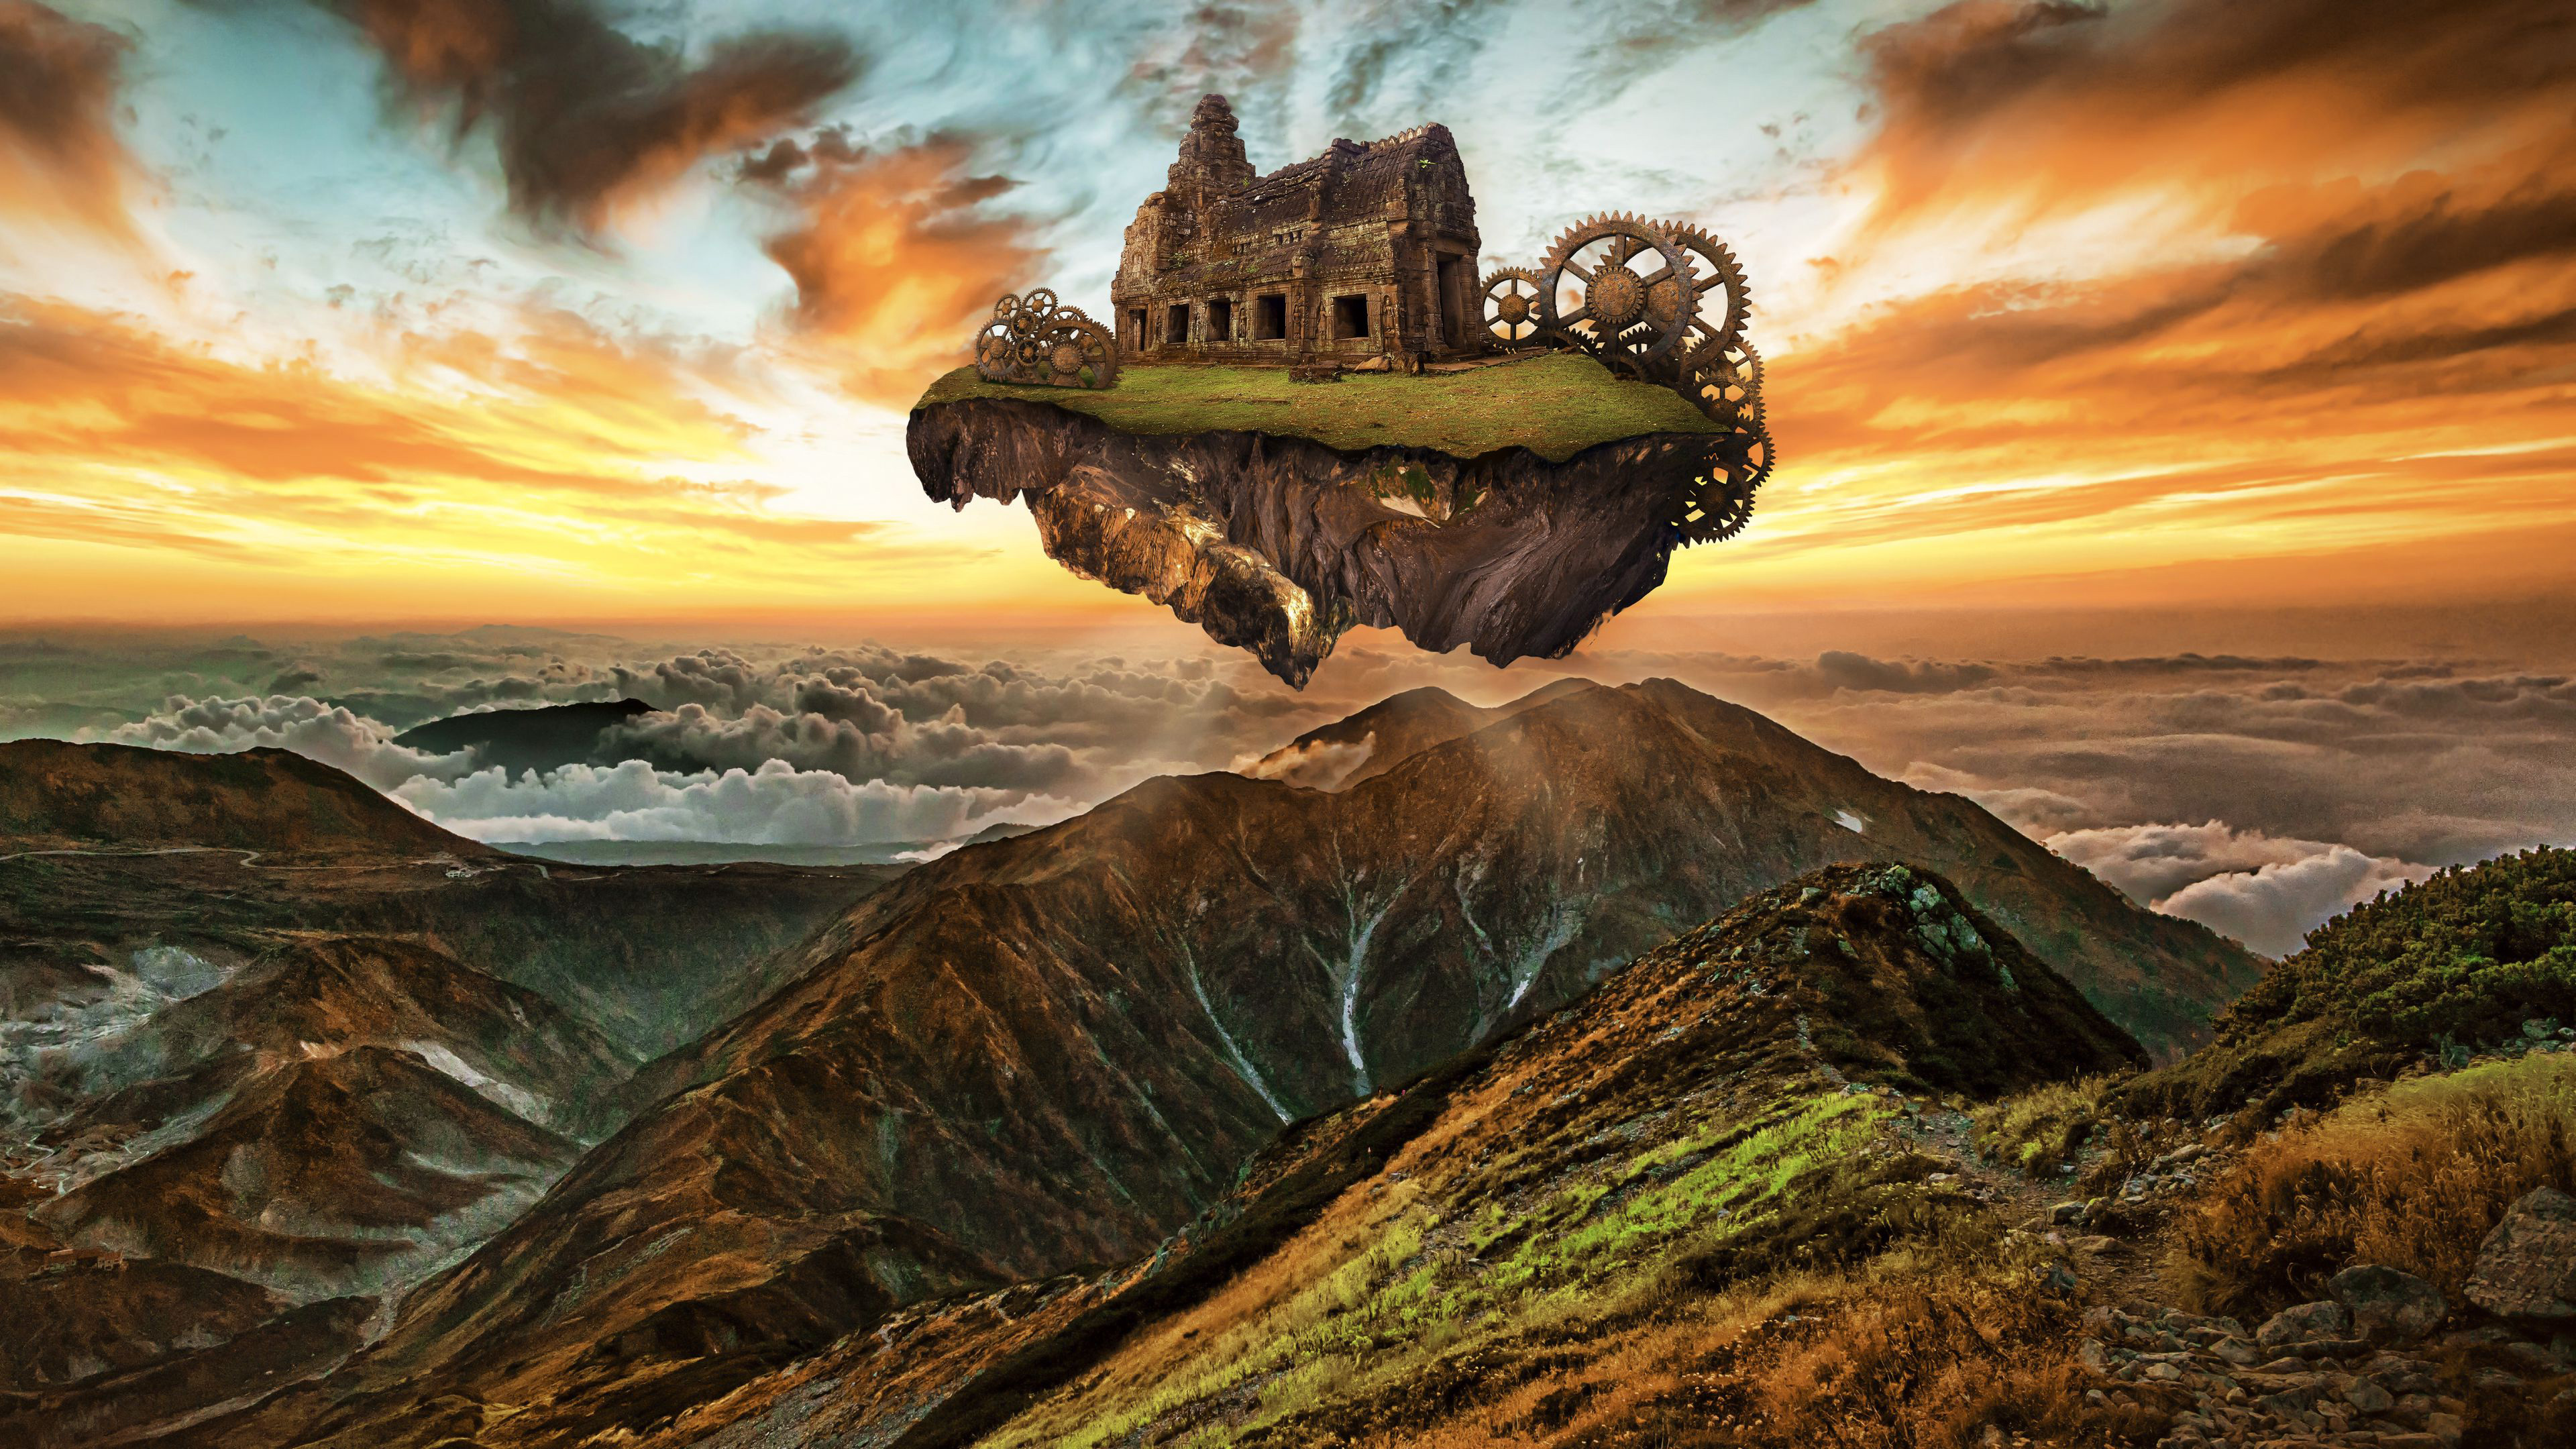 Technical marvel a Steampunk snail in the middle of a fantastical landscape  very detailed the form of the snail the spiralled house her bod... - AI  Generated Artwork - NightCafe Creator